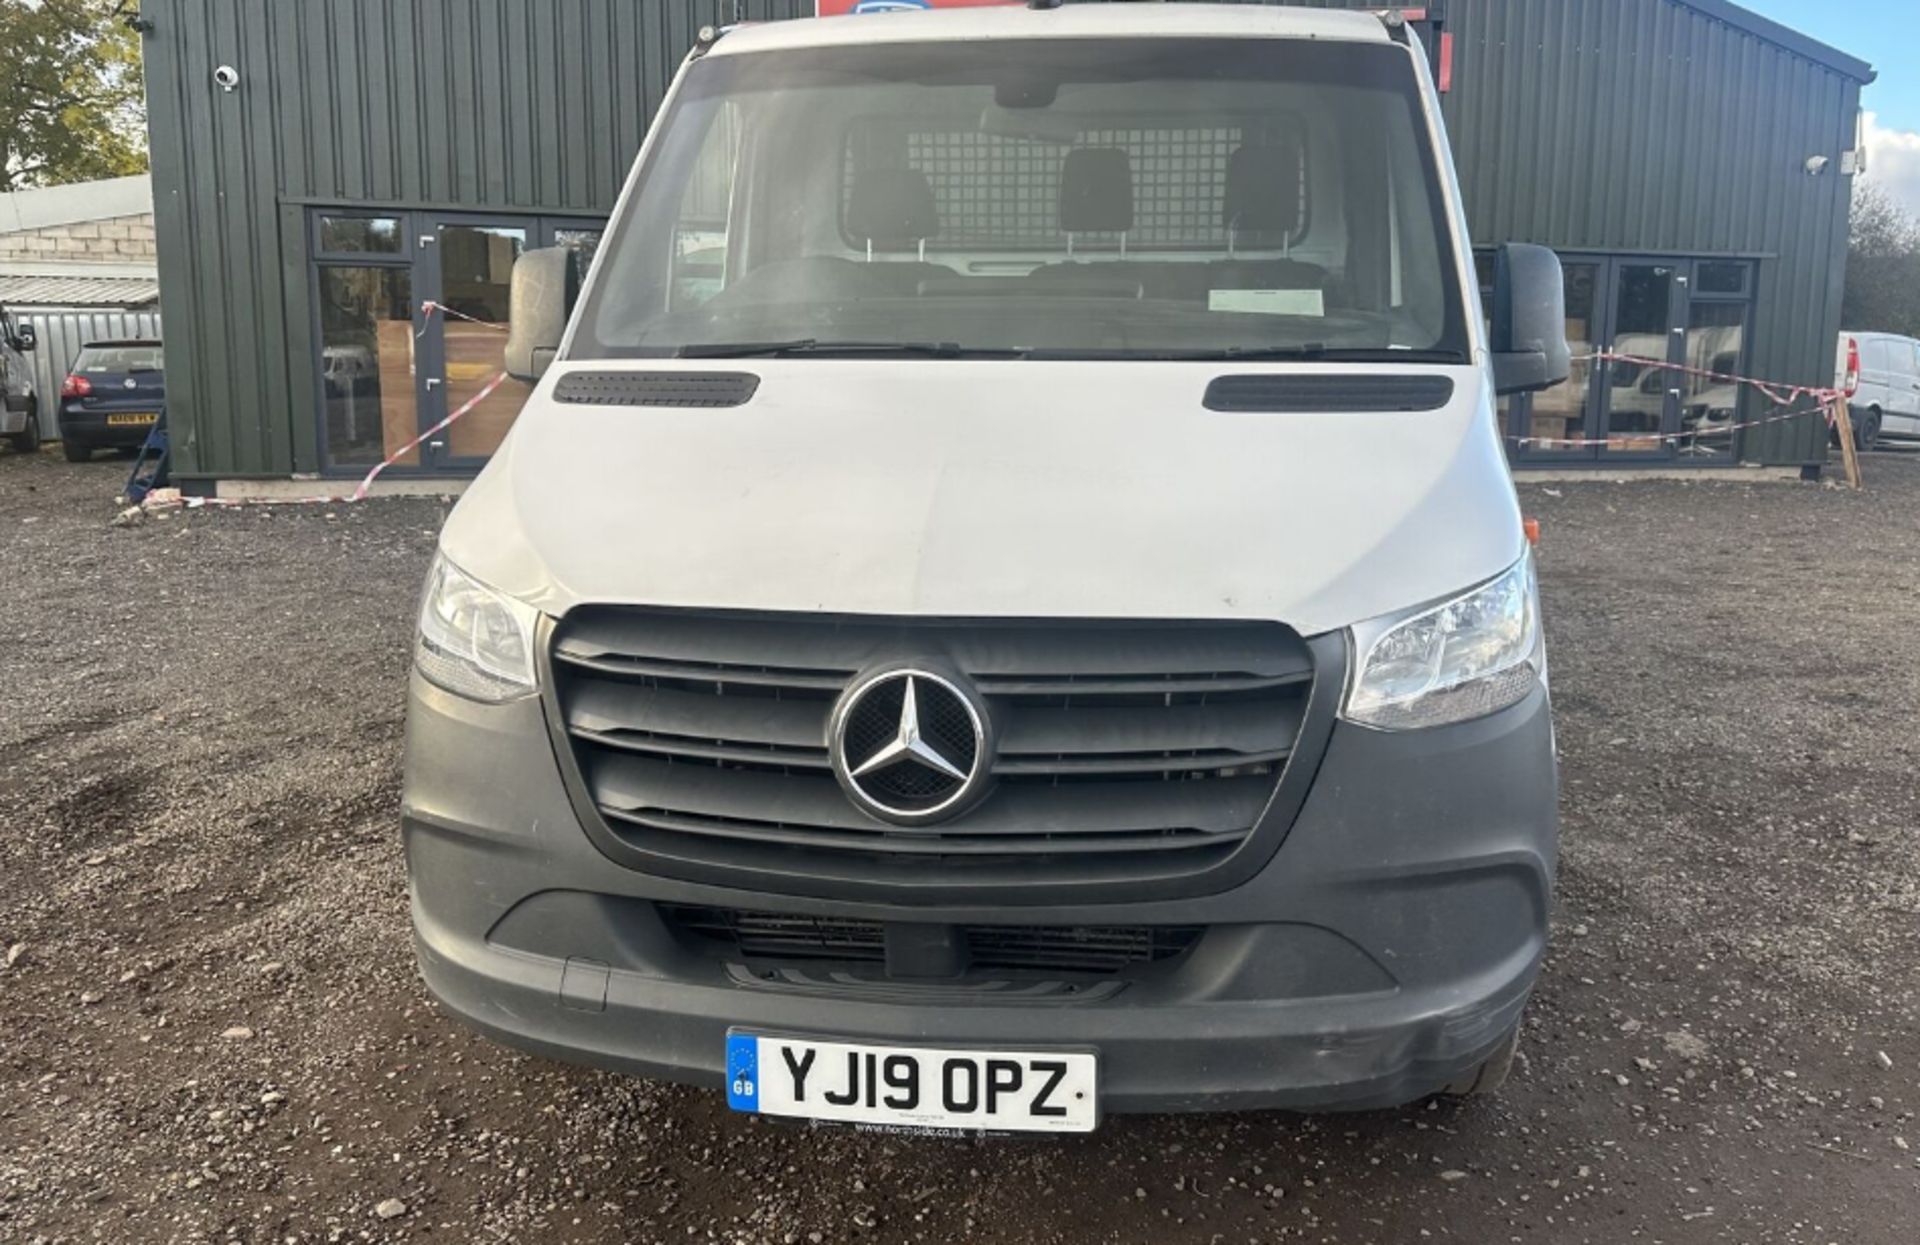 105K MILES - 2019 MERCEDES SPRINTER 314: LOW MILEAGE RECOVERY - MOT MARCH 2024 - Image 8 of 15